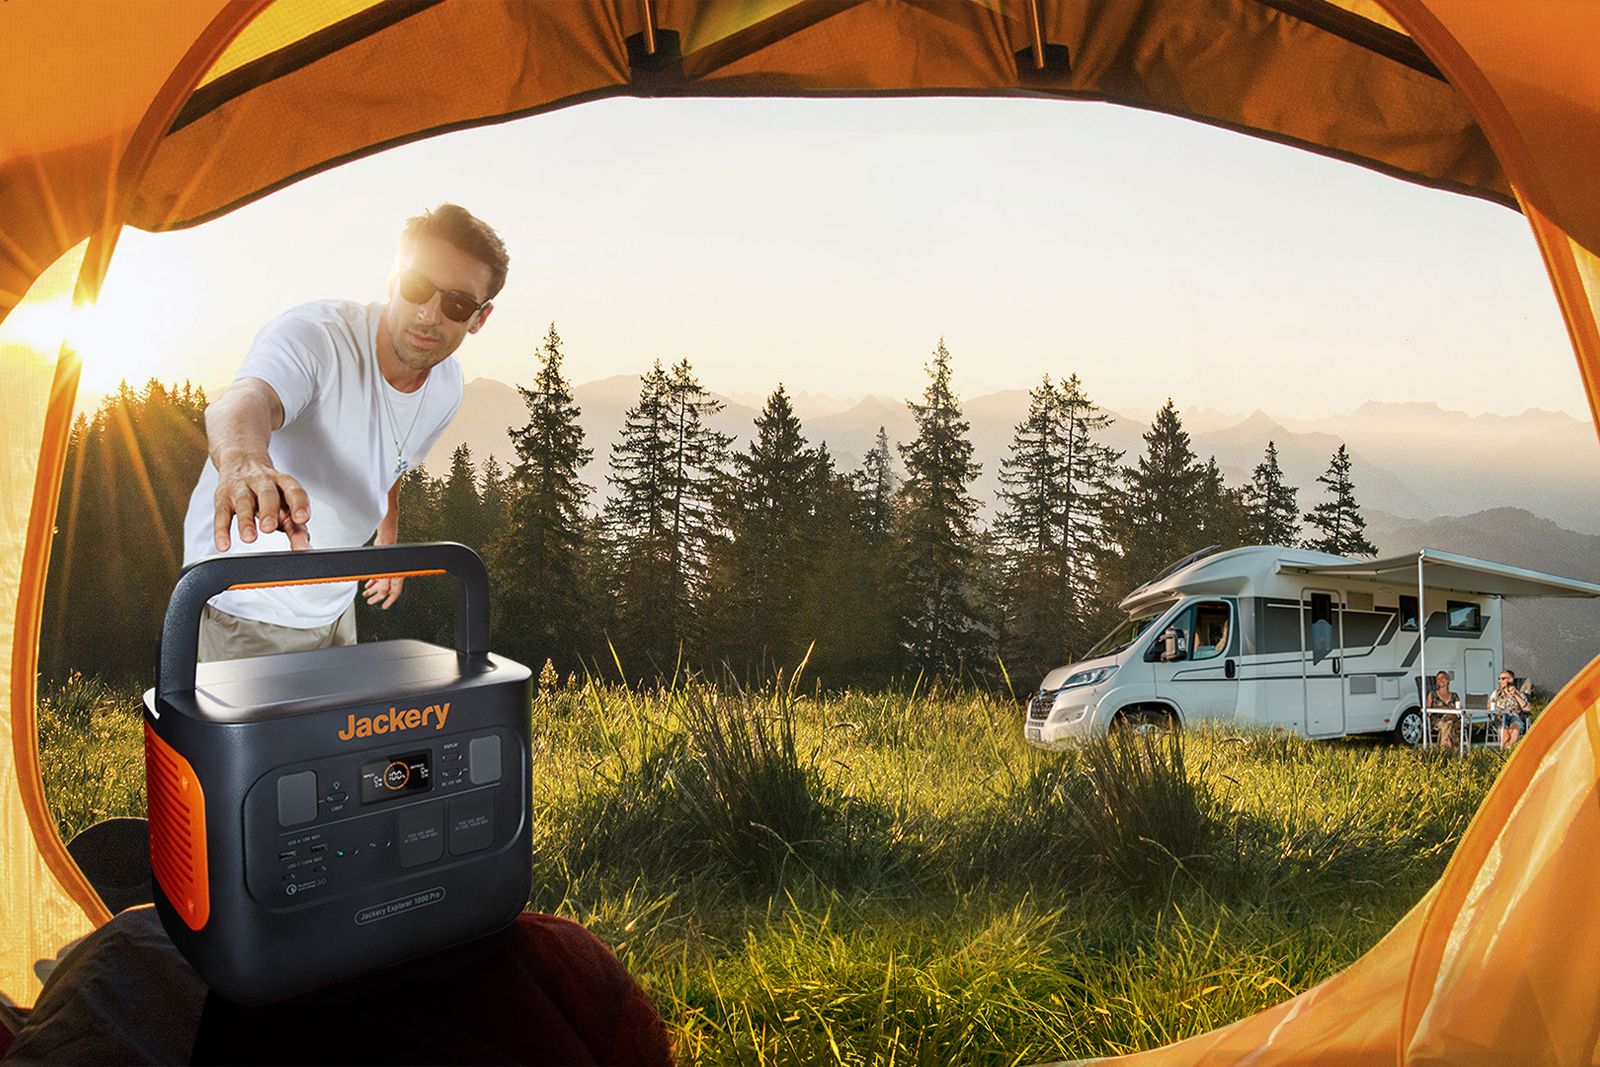 The speed of sunlight: New Jackery Solar Generator 1000 Pro enables fast solar charging photo 2